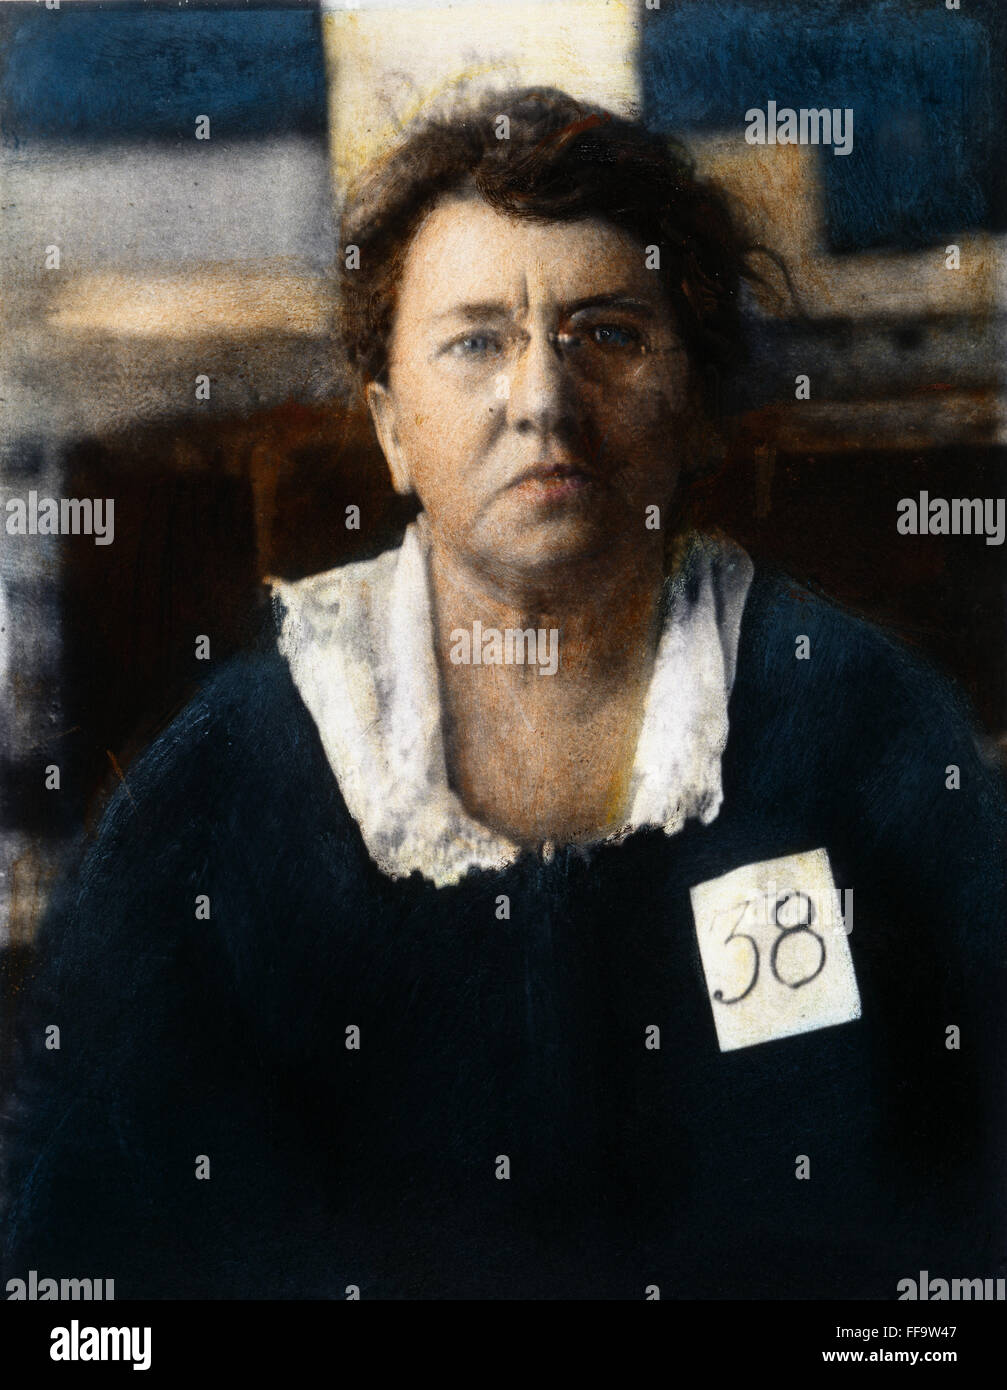 EMMA GOLDMAN (1869-1940). /nAmerican anarchist: oil over a photograph taken at the time of her deportation from the United States in 1919. Stock Photo